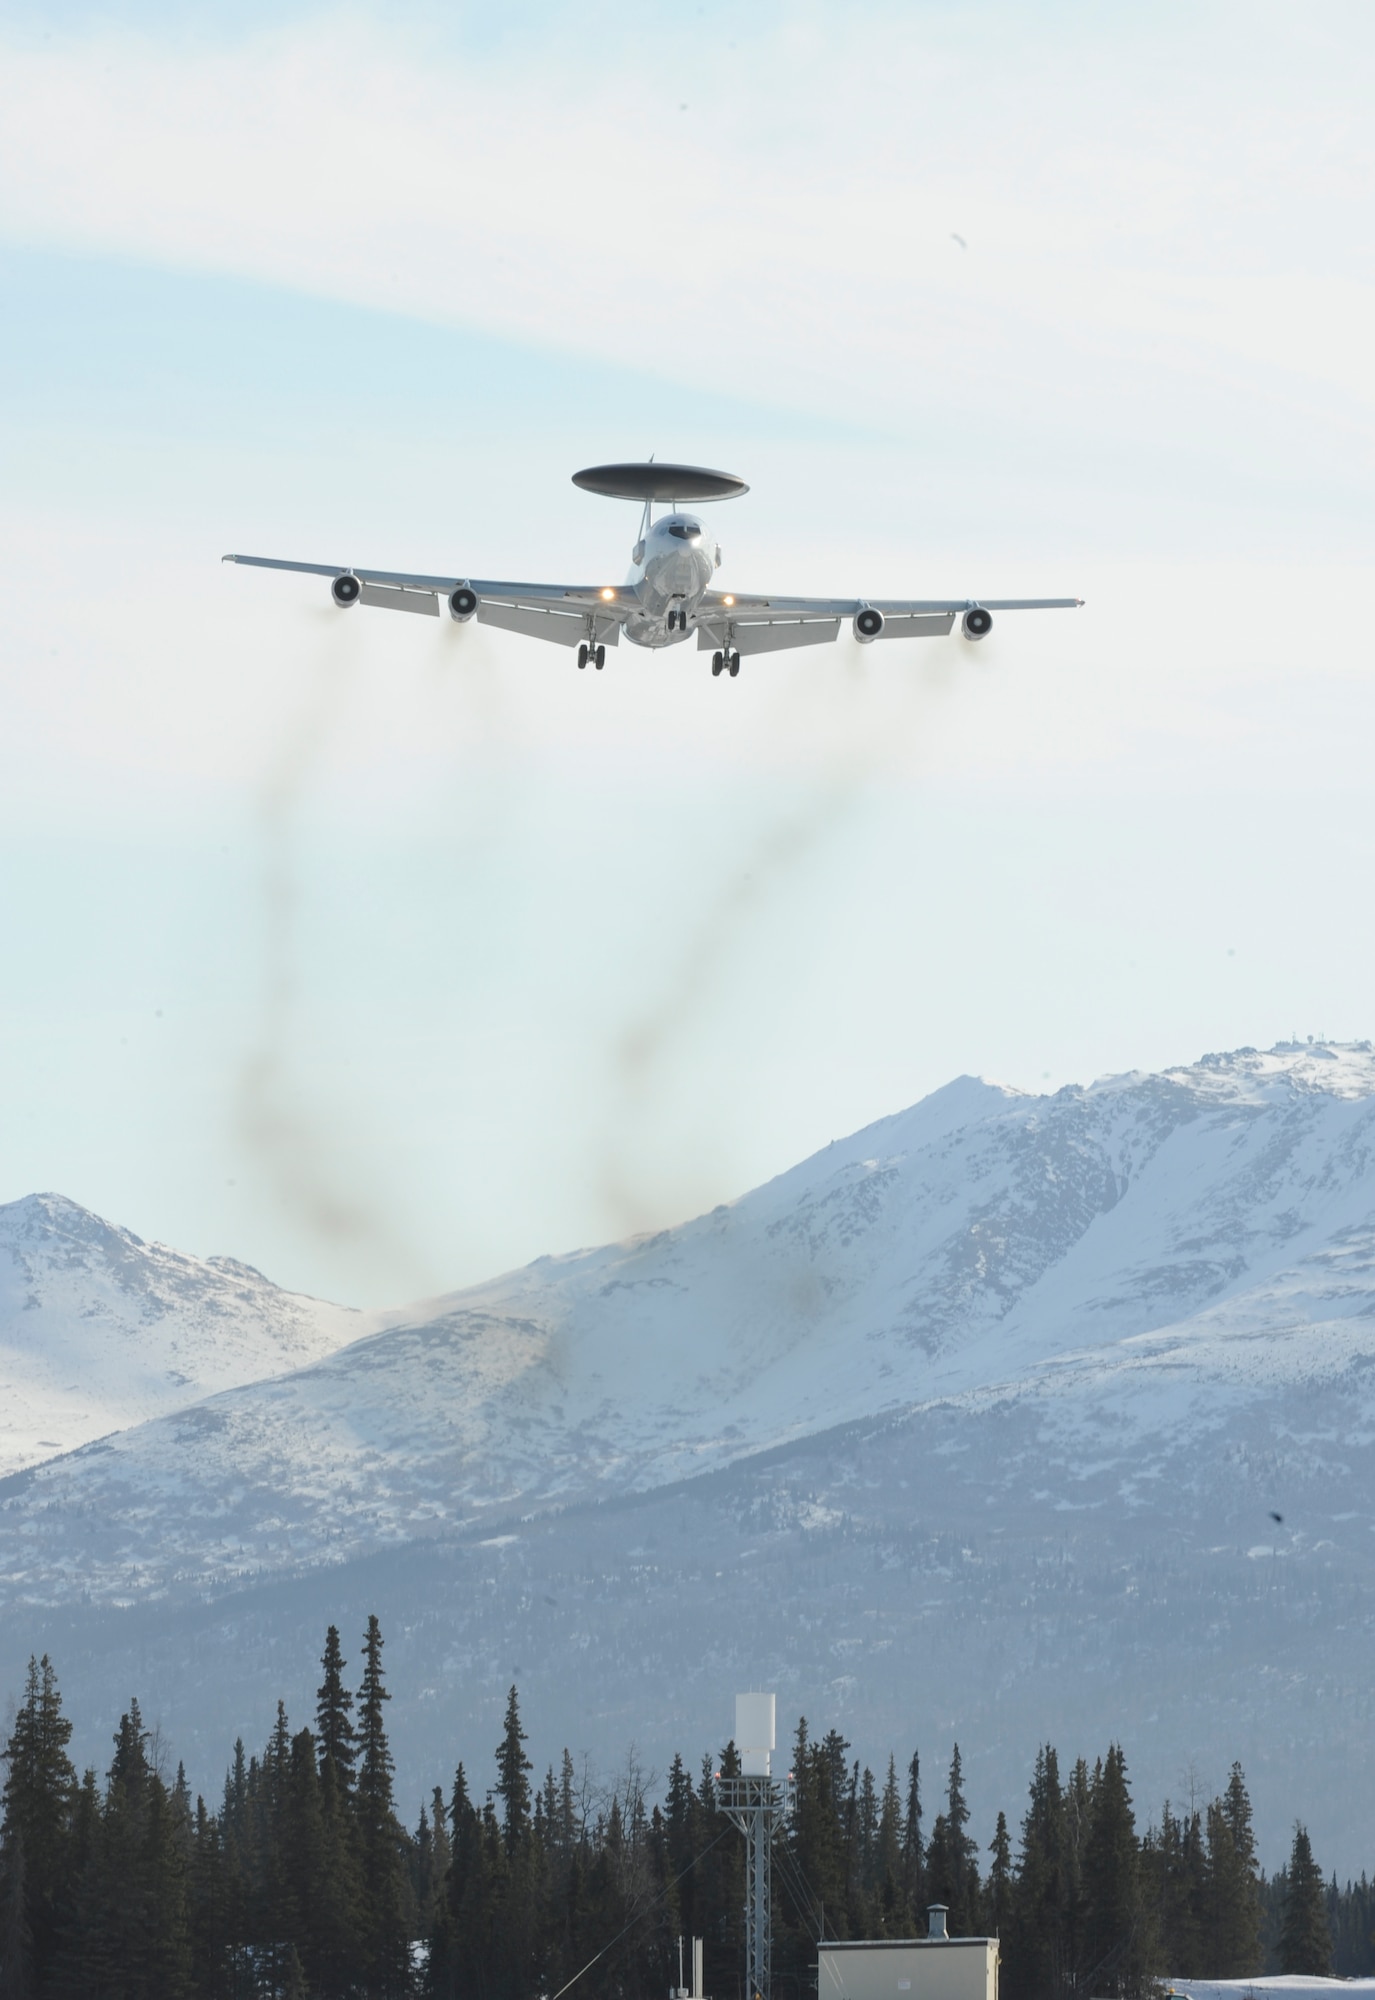 ELMENDORF AIR FORCE BASE, Alaska -- An E-3 from the 962nd Airborne Air Control Squadron prepares to touch down during a  mock exercise senario, April 6, 2009. Aircraft and Airmen base-wide are participating in Polar Force 04-09 In preparation for for the Operational Readiness Inspection in June.( U.S. Air Force photo by/ Senior Airman Matthew Owens)